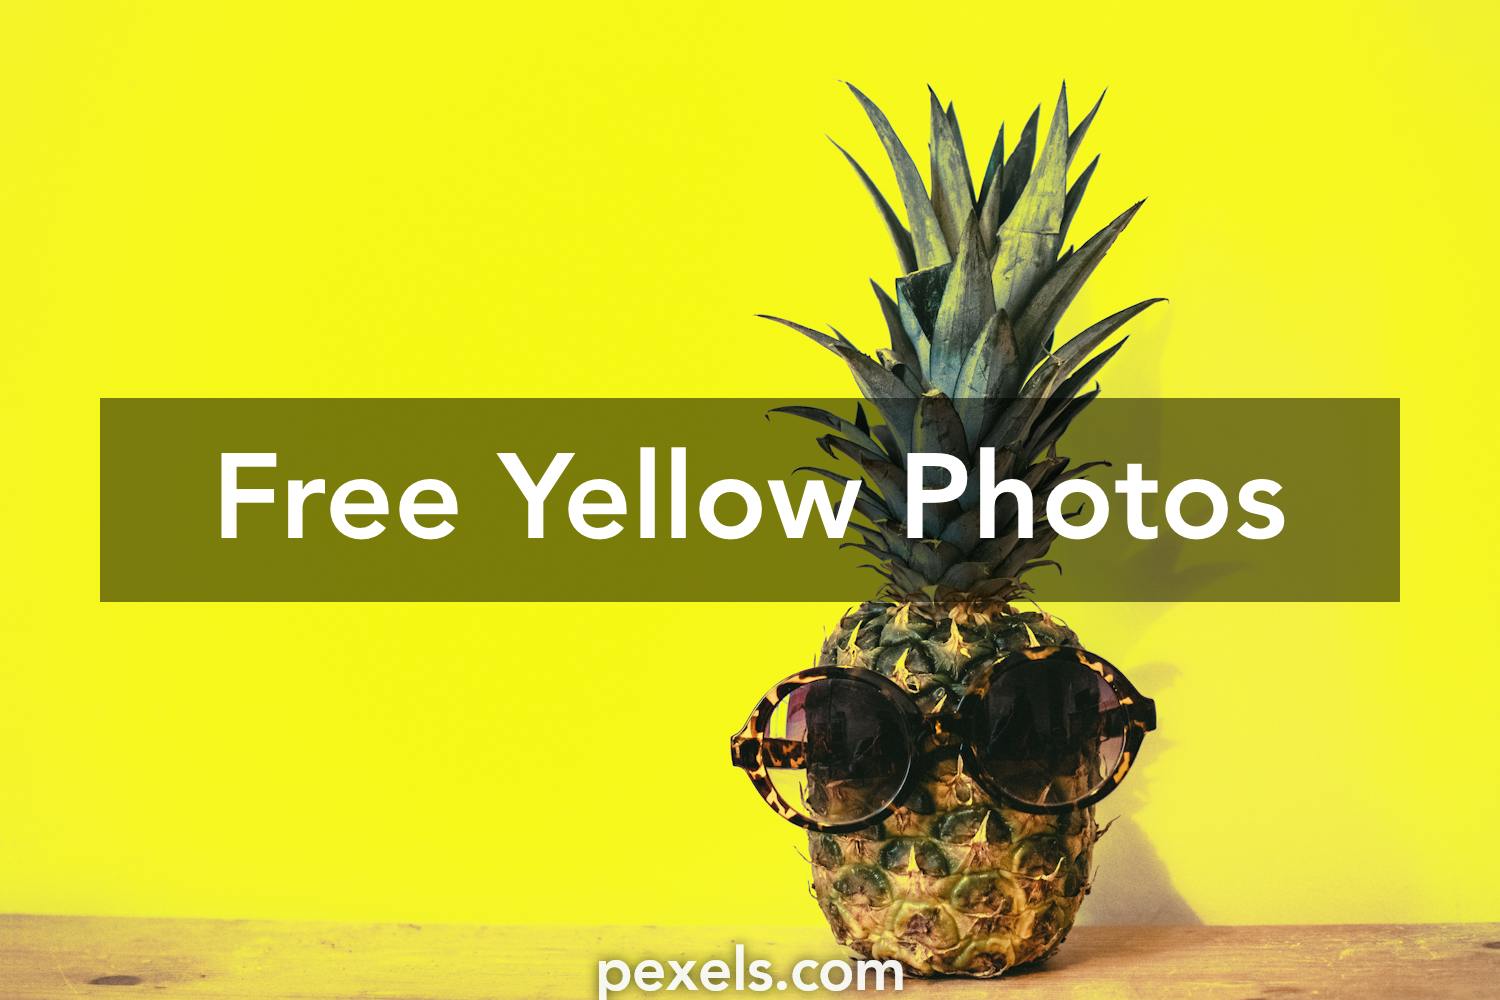 Free stock images with the color Yellow (#ffff00)